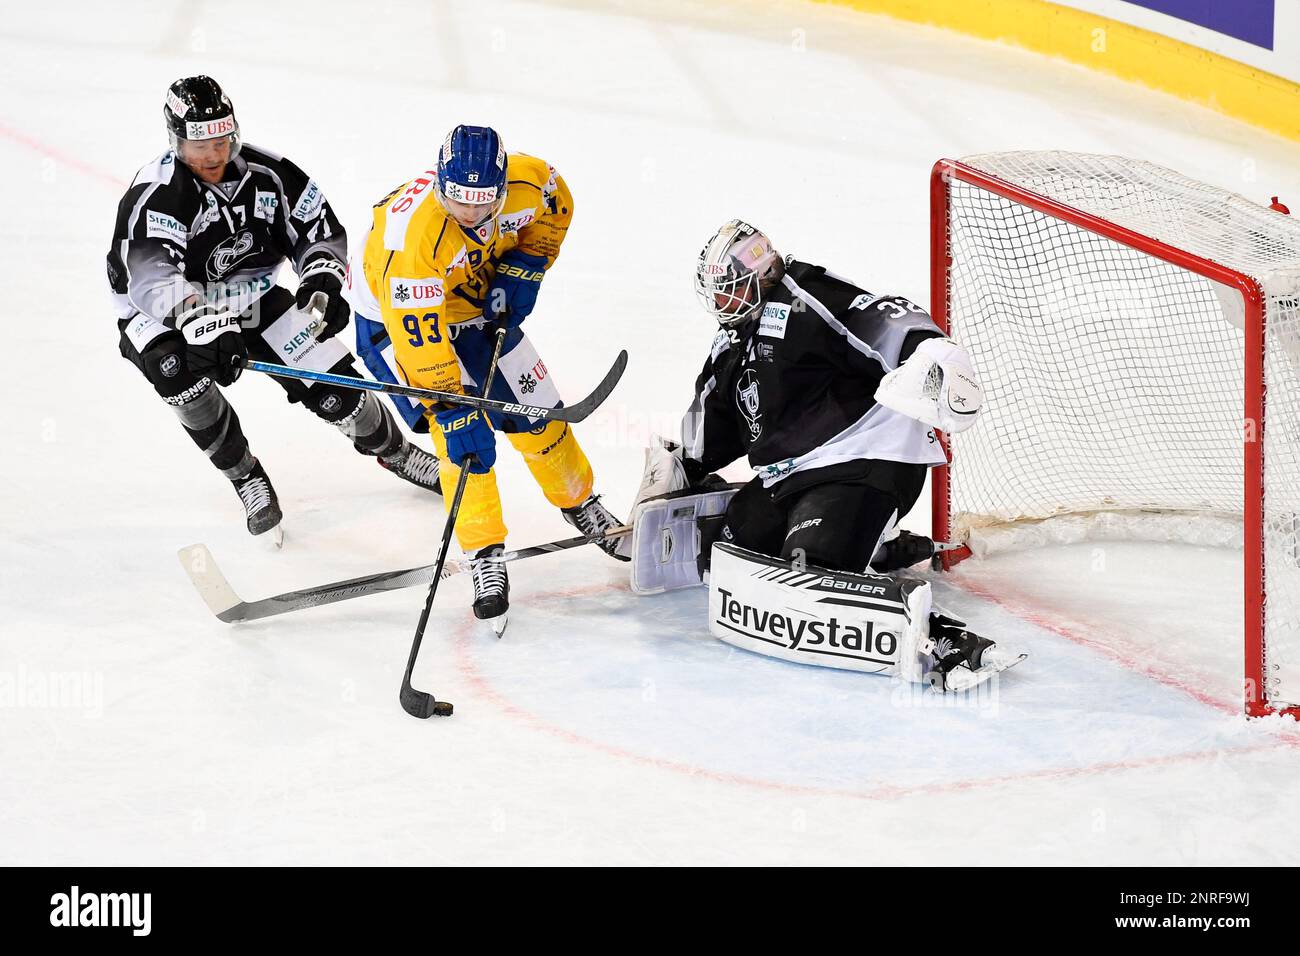 Davos Yannick Frehner, center, scores the opening goal during the game between TPS Turku and HC Davos, at the 93th Spengler Cup ice hockey tournament in Davos, Switzerland, Sunday, Dec